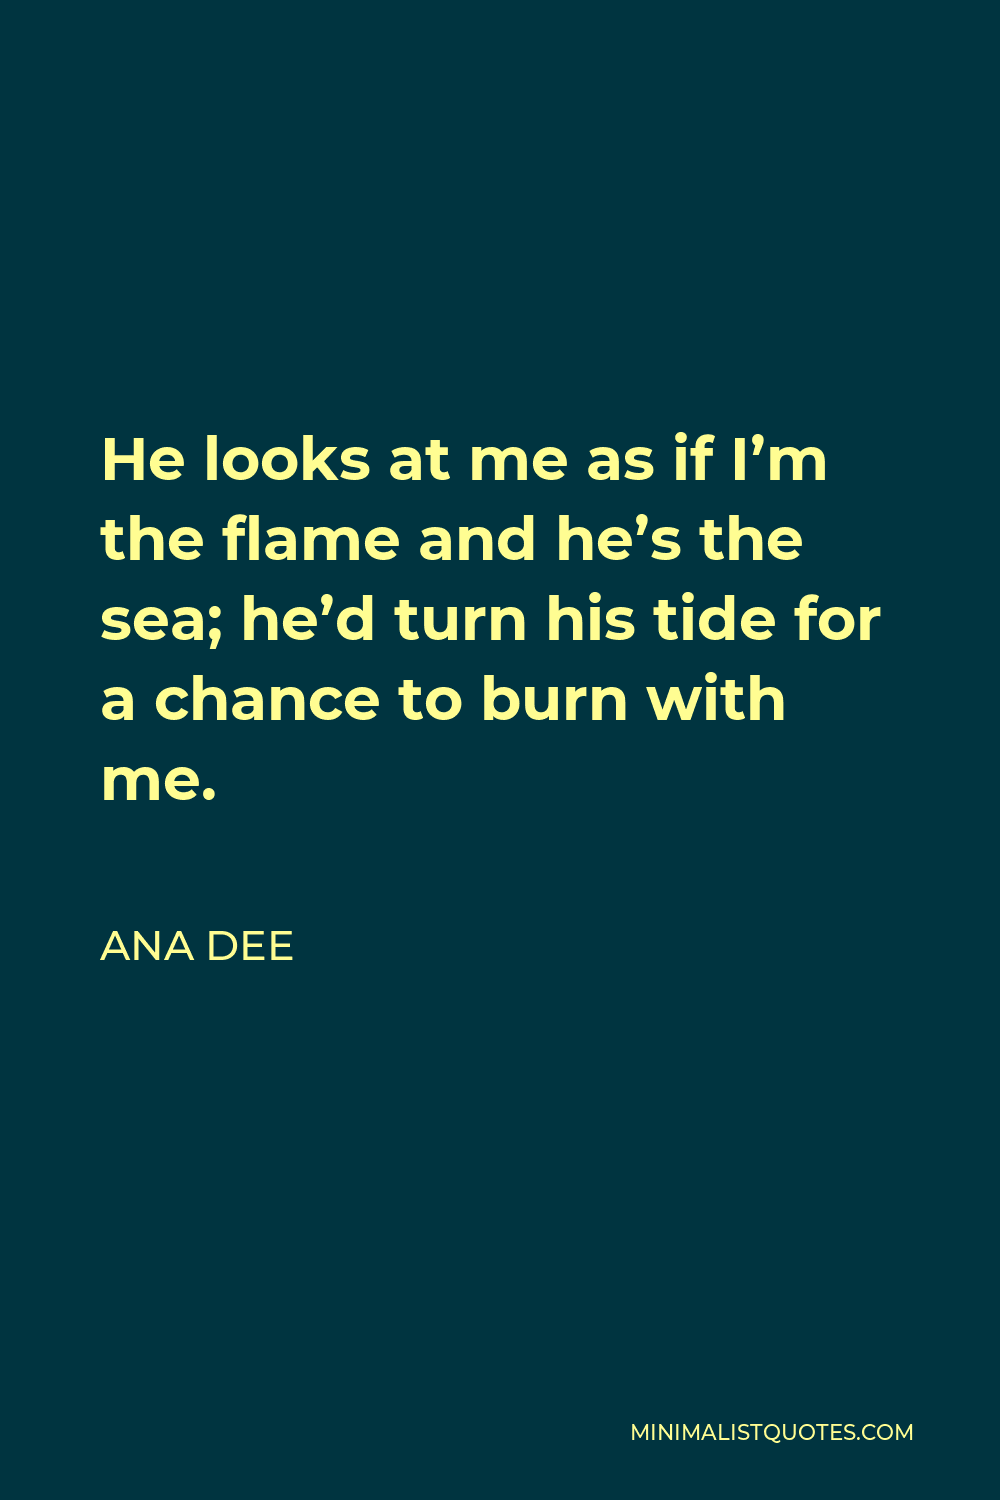 Ana Dee Quote - He looks at me as if I’m the flame and he’s the sea; he’d turn his tide for a chance to burn with me.